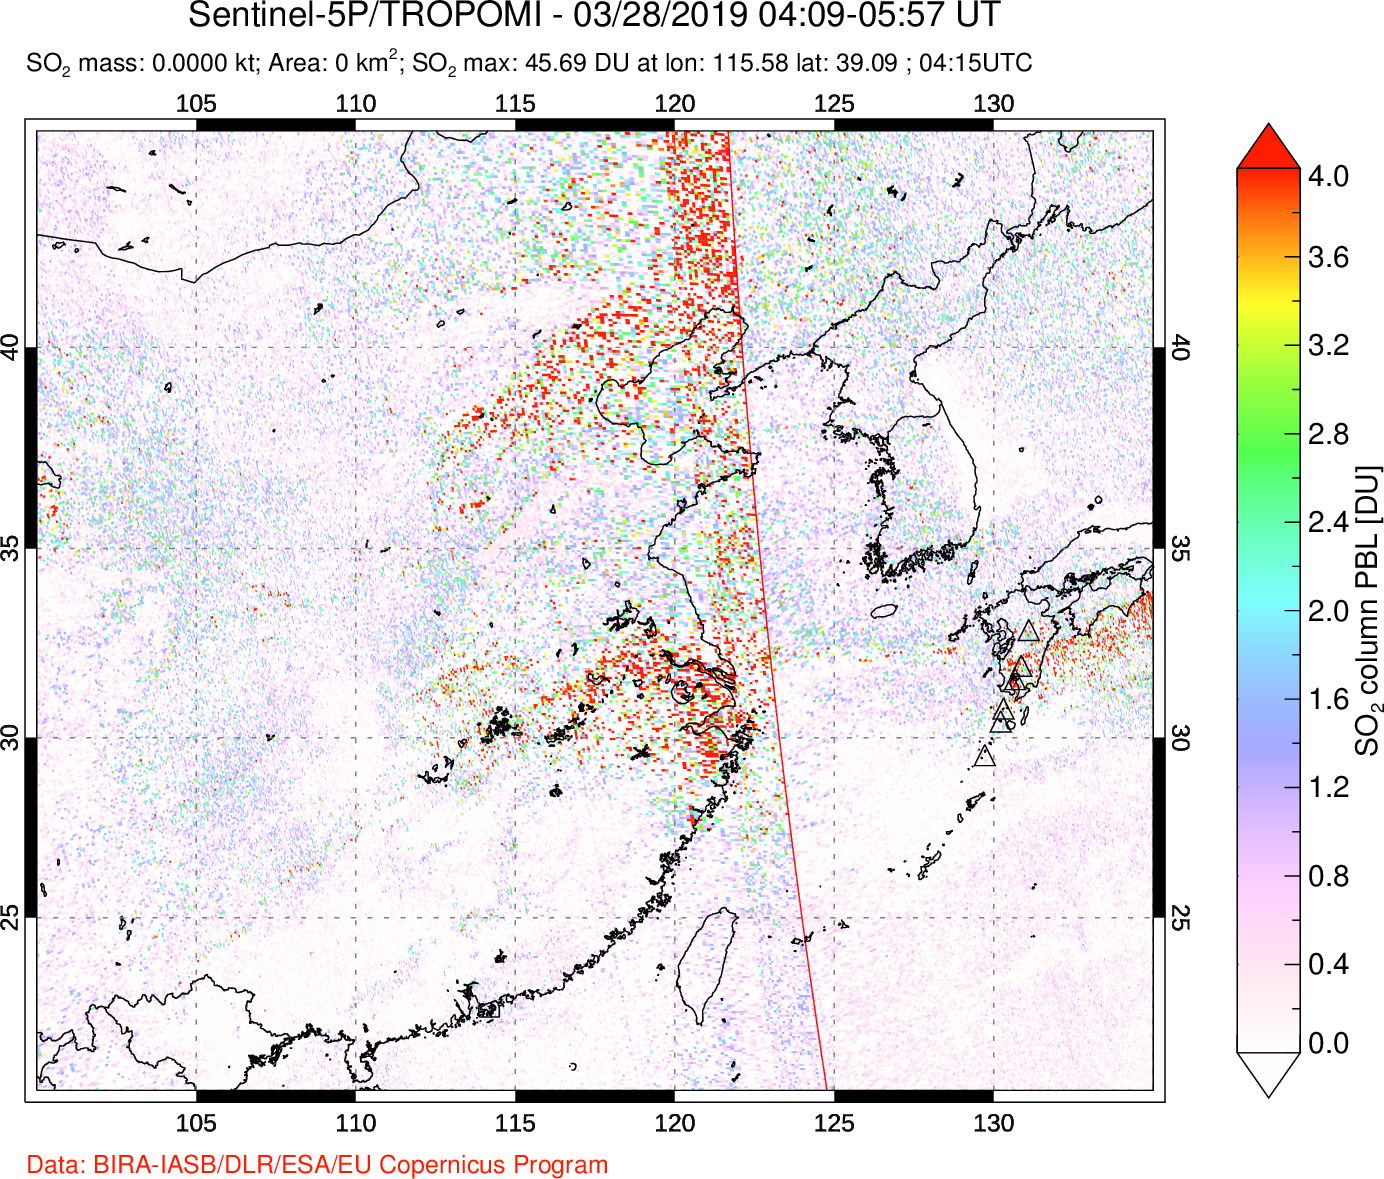 A sulfur dioxide image over Eastern China on Mar 28, 2019.